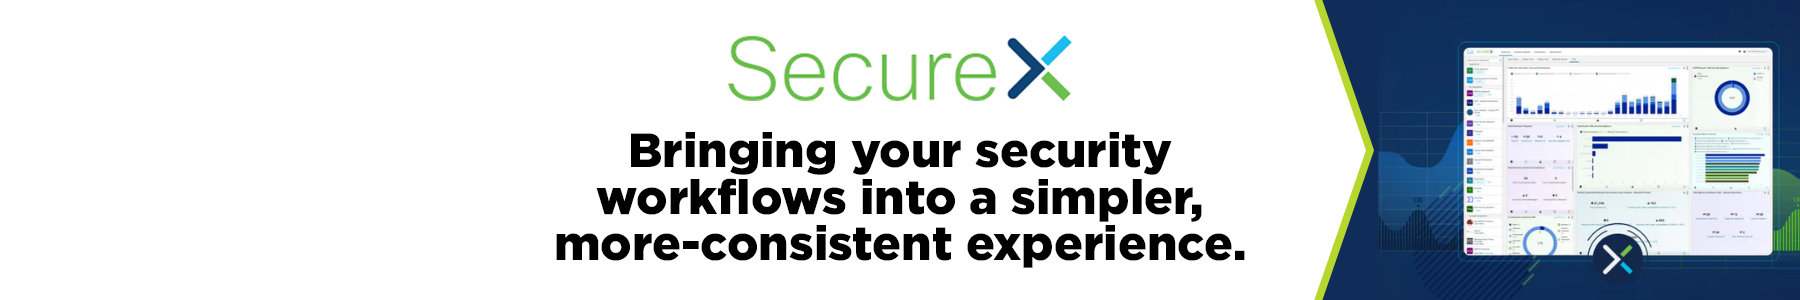 secure-x-banner